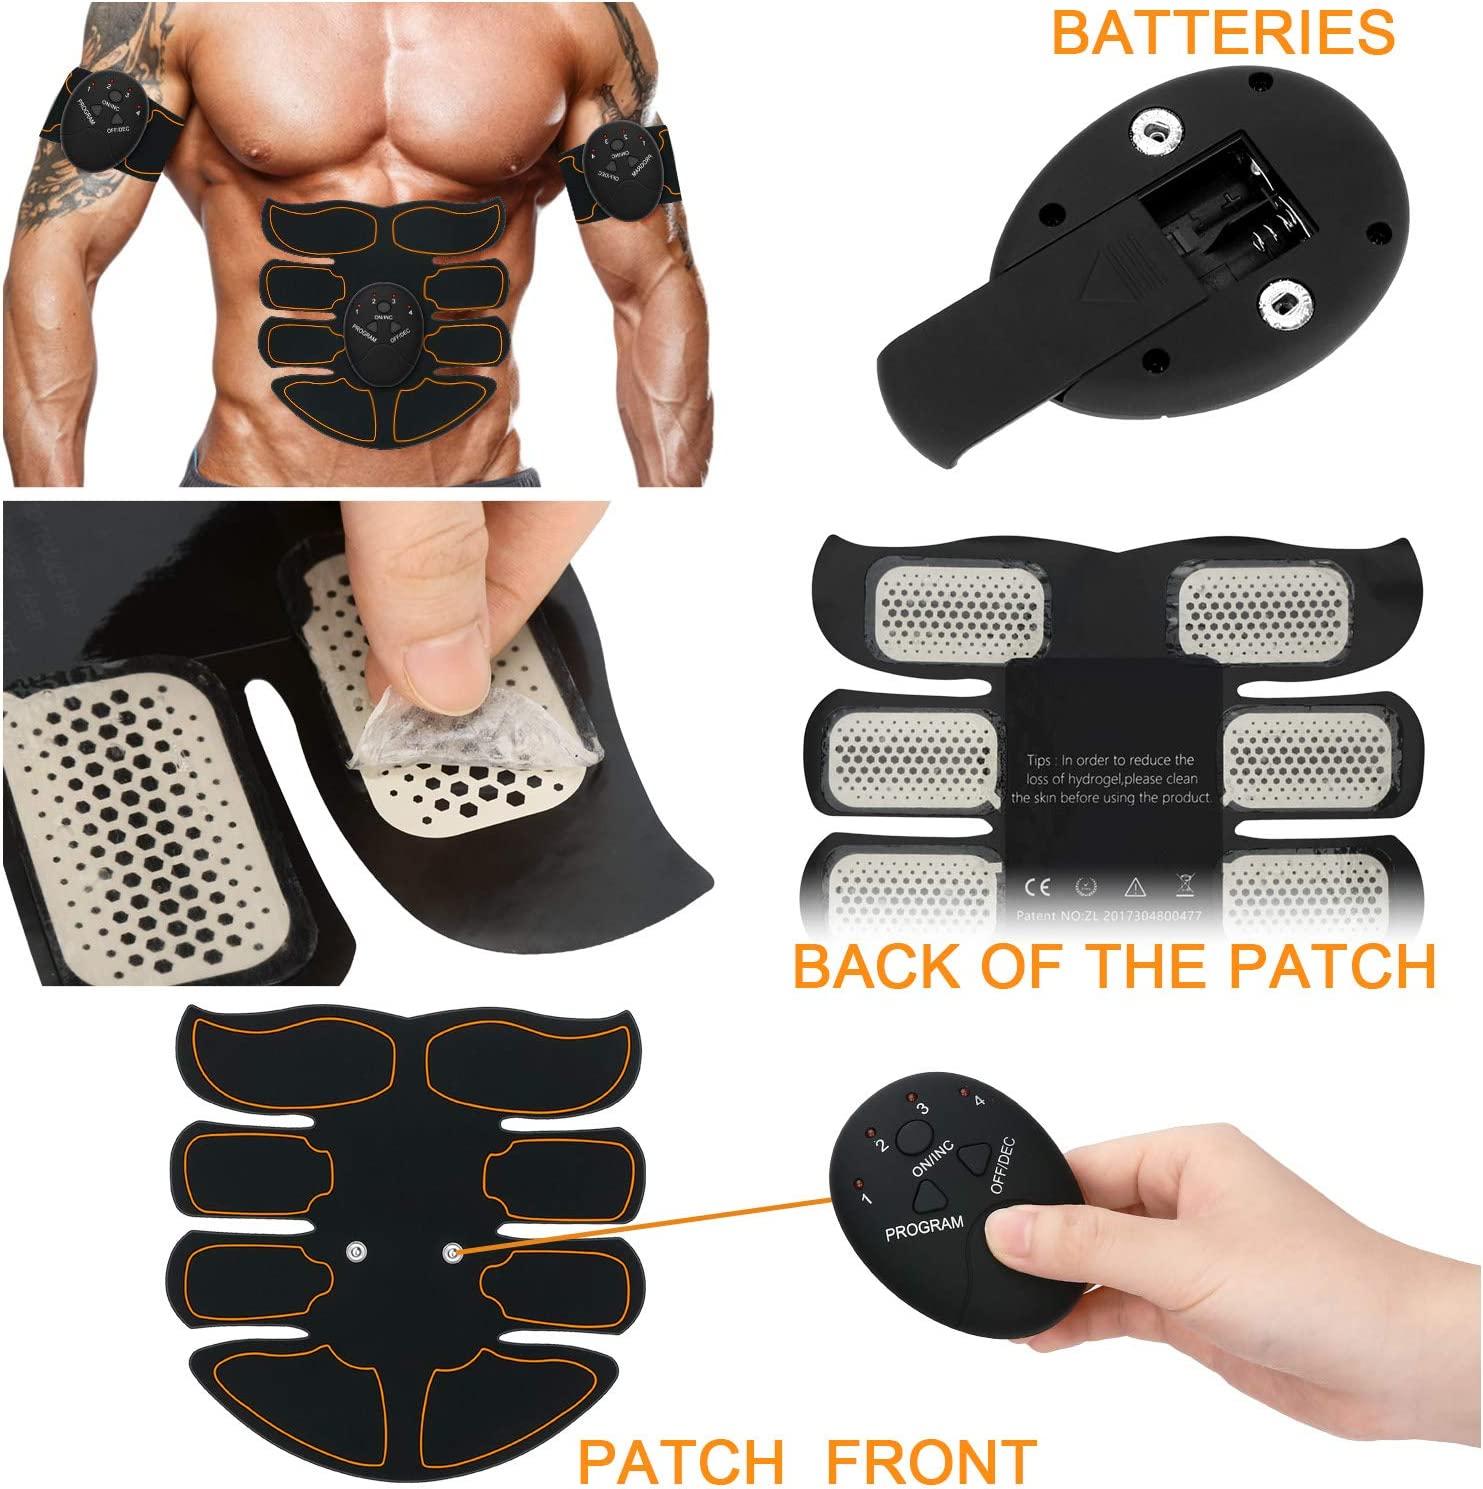 Portable Abdominal Muscle Electrostimulation Muscle Stimulator - Muscle  Training Equipment for Men Women, Home Office Exercise, with 10 Gel Pads 